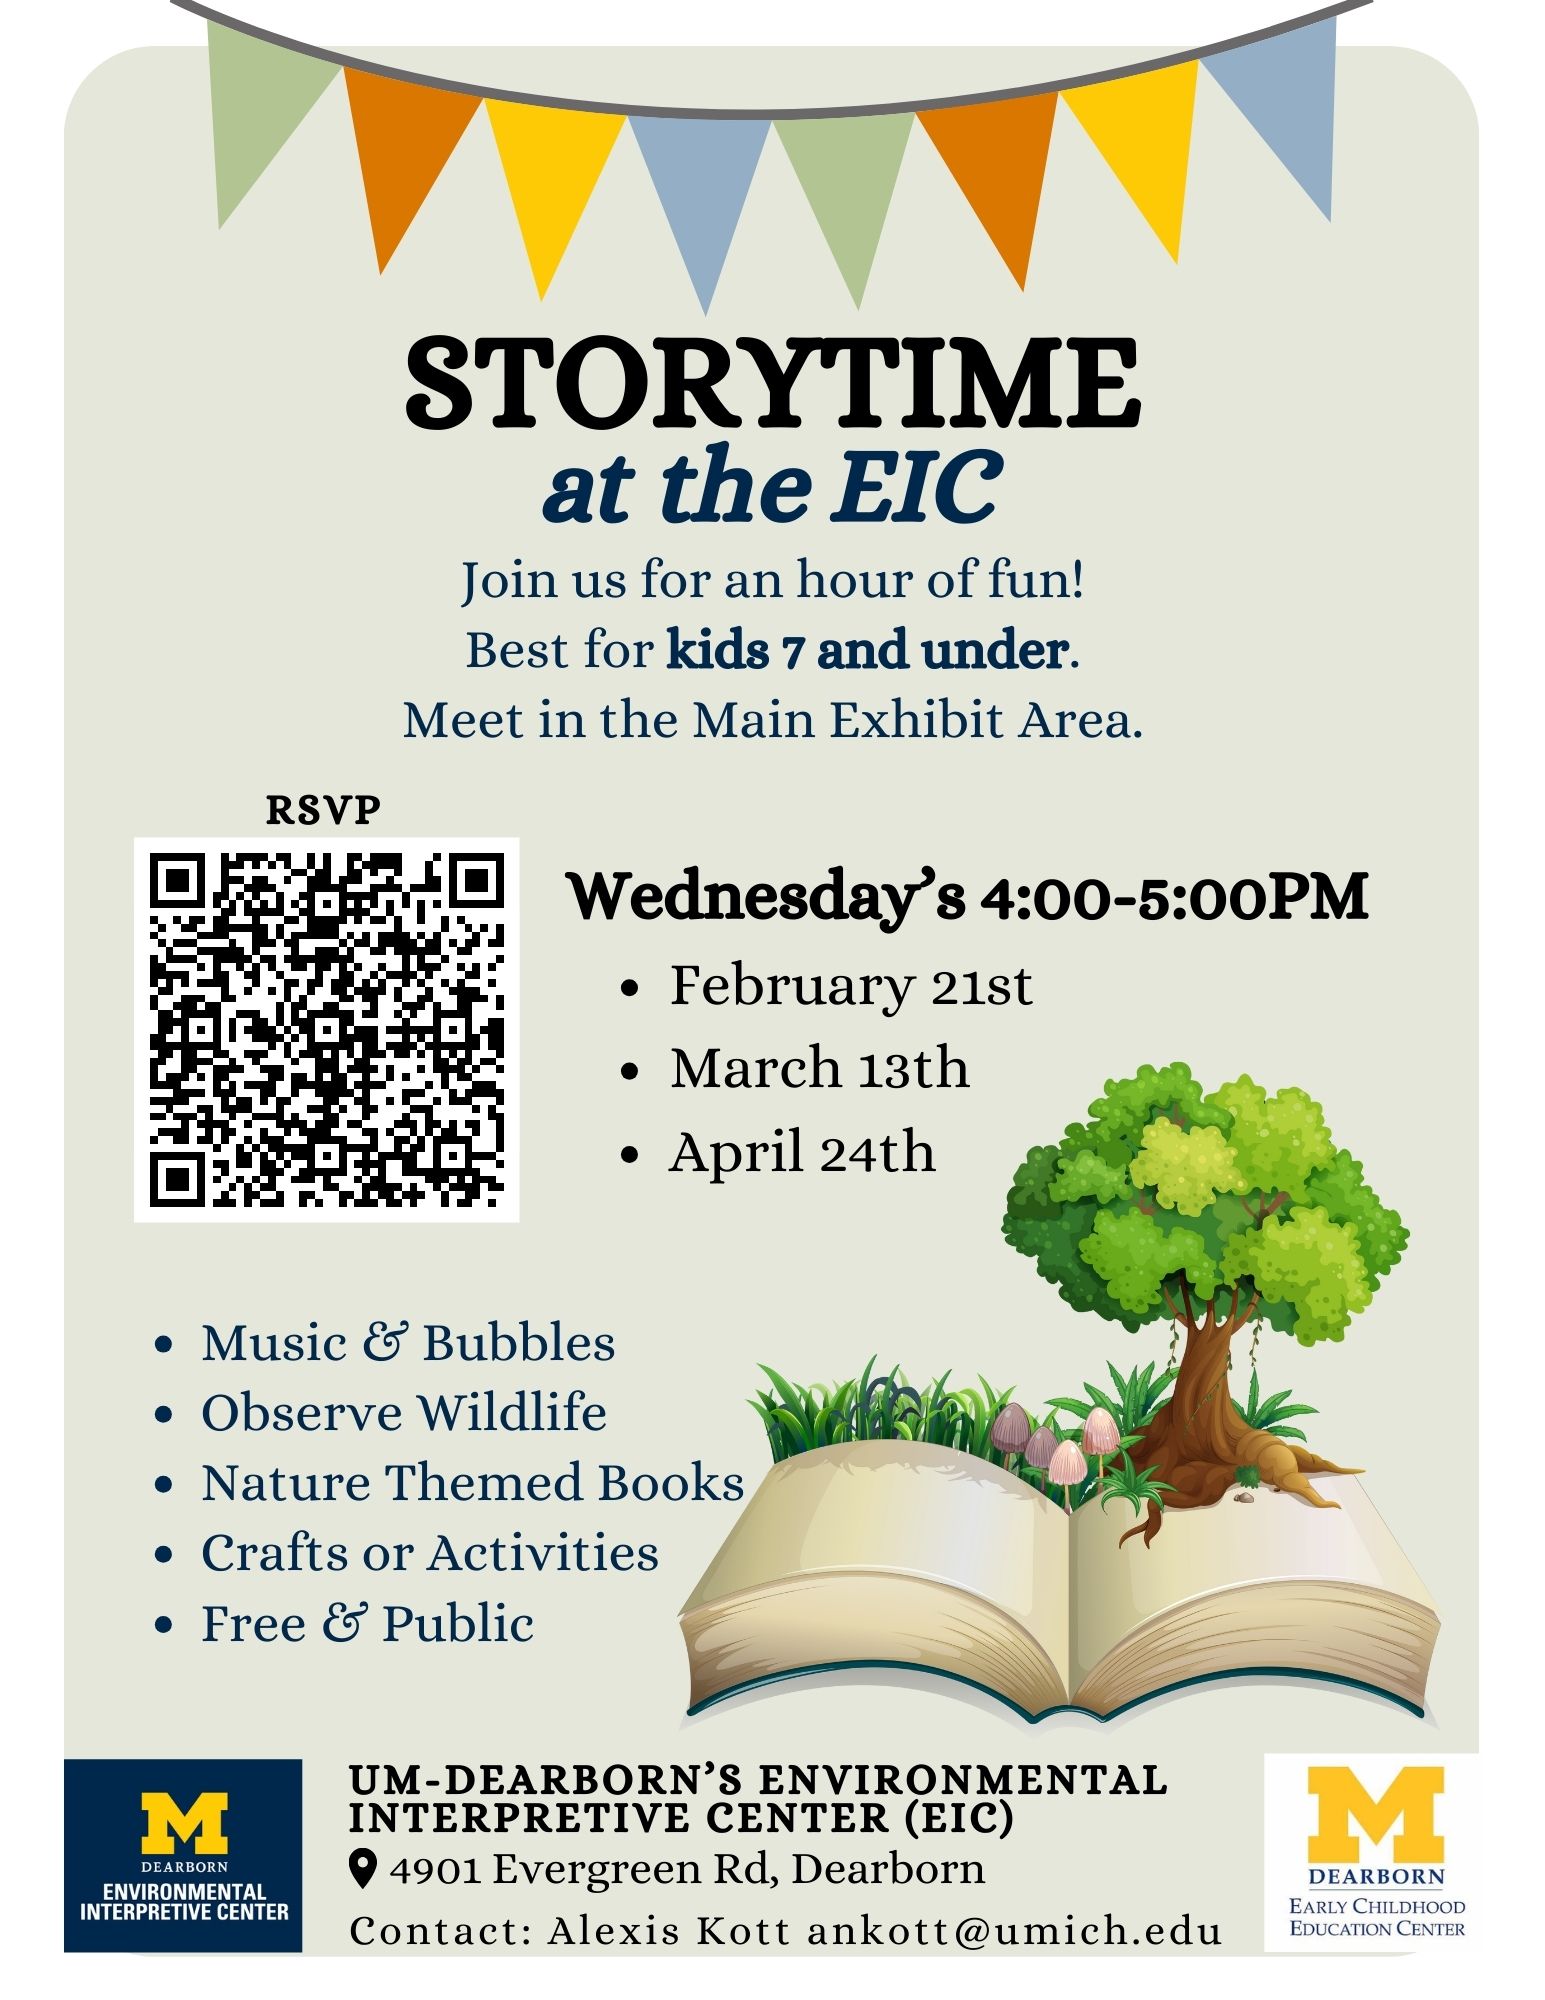 story time Wednesday feb 21st 4-5pm